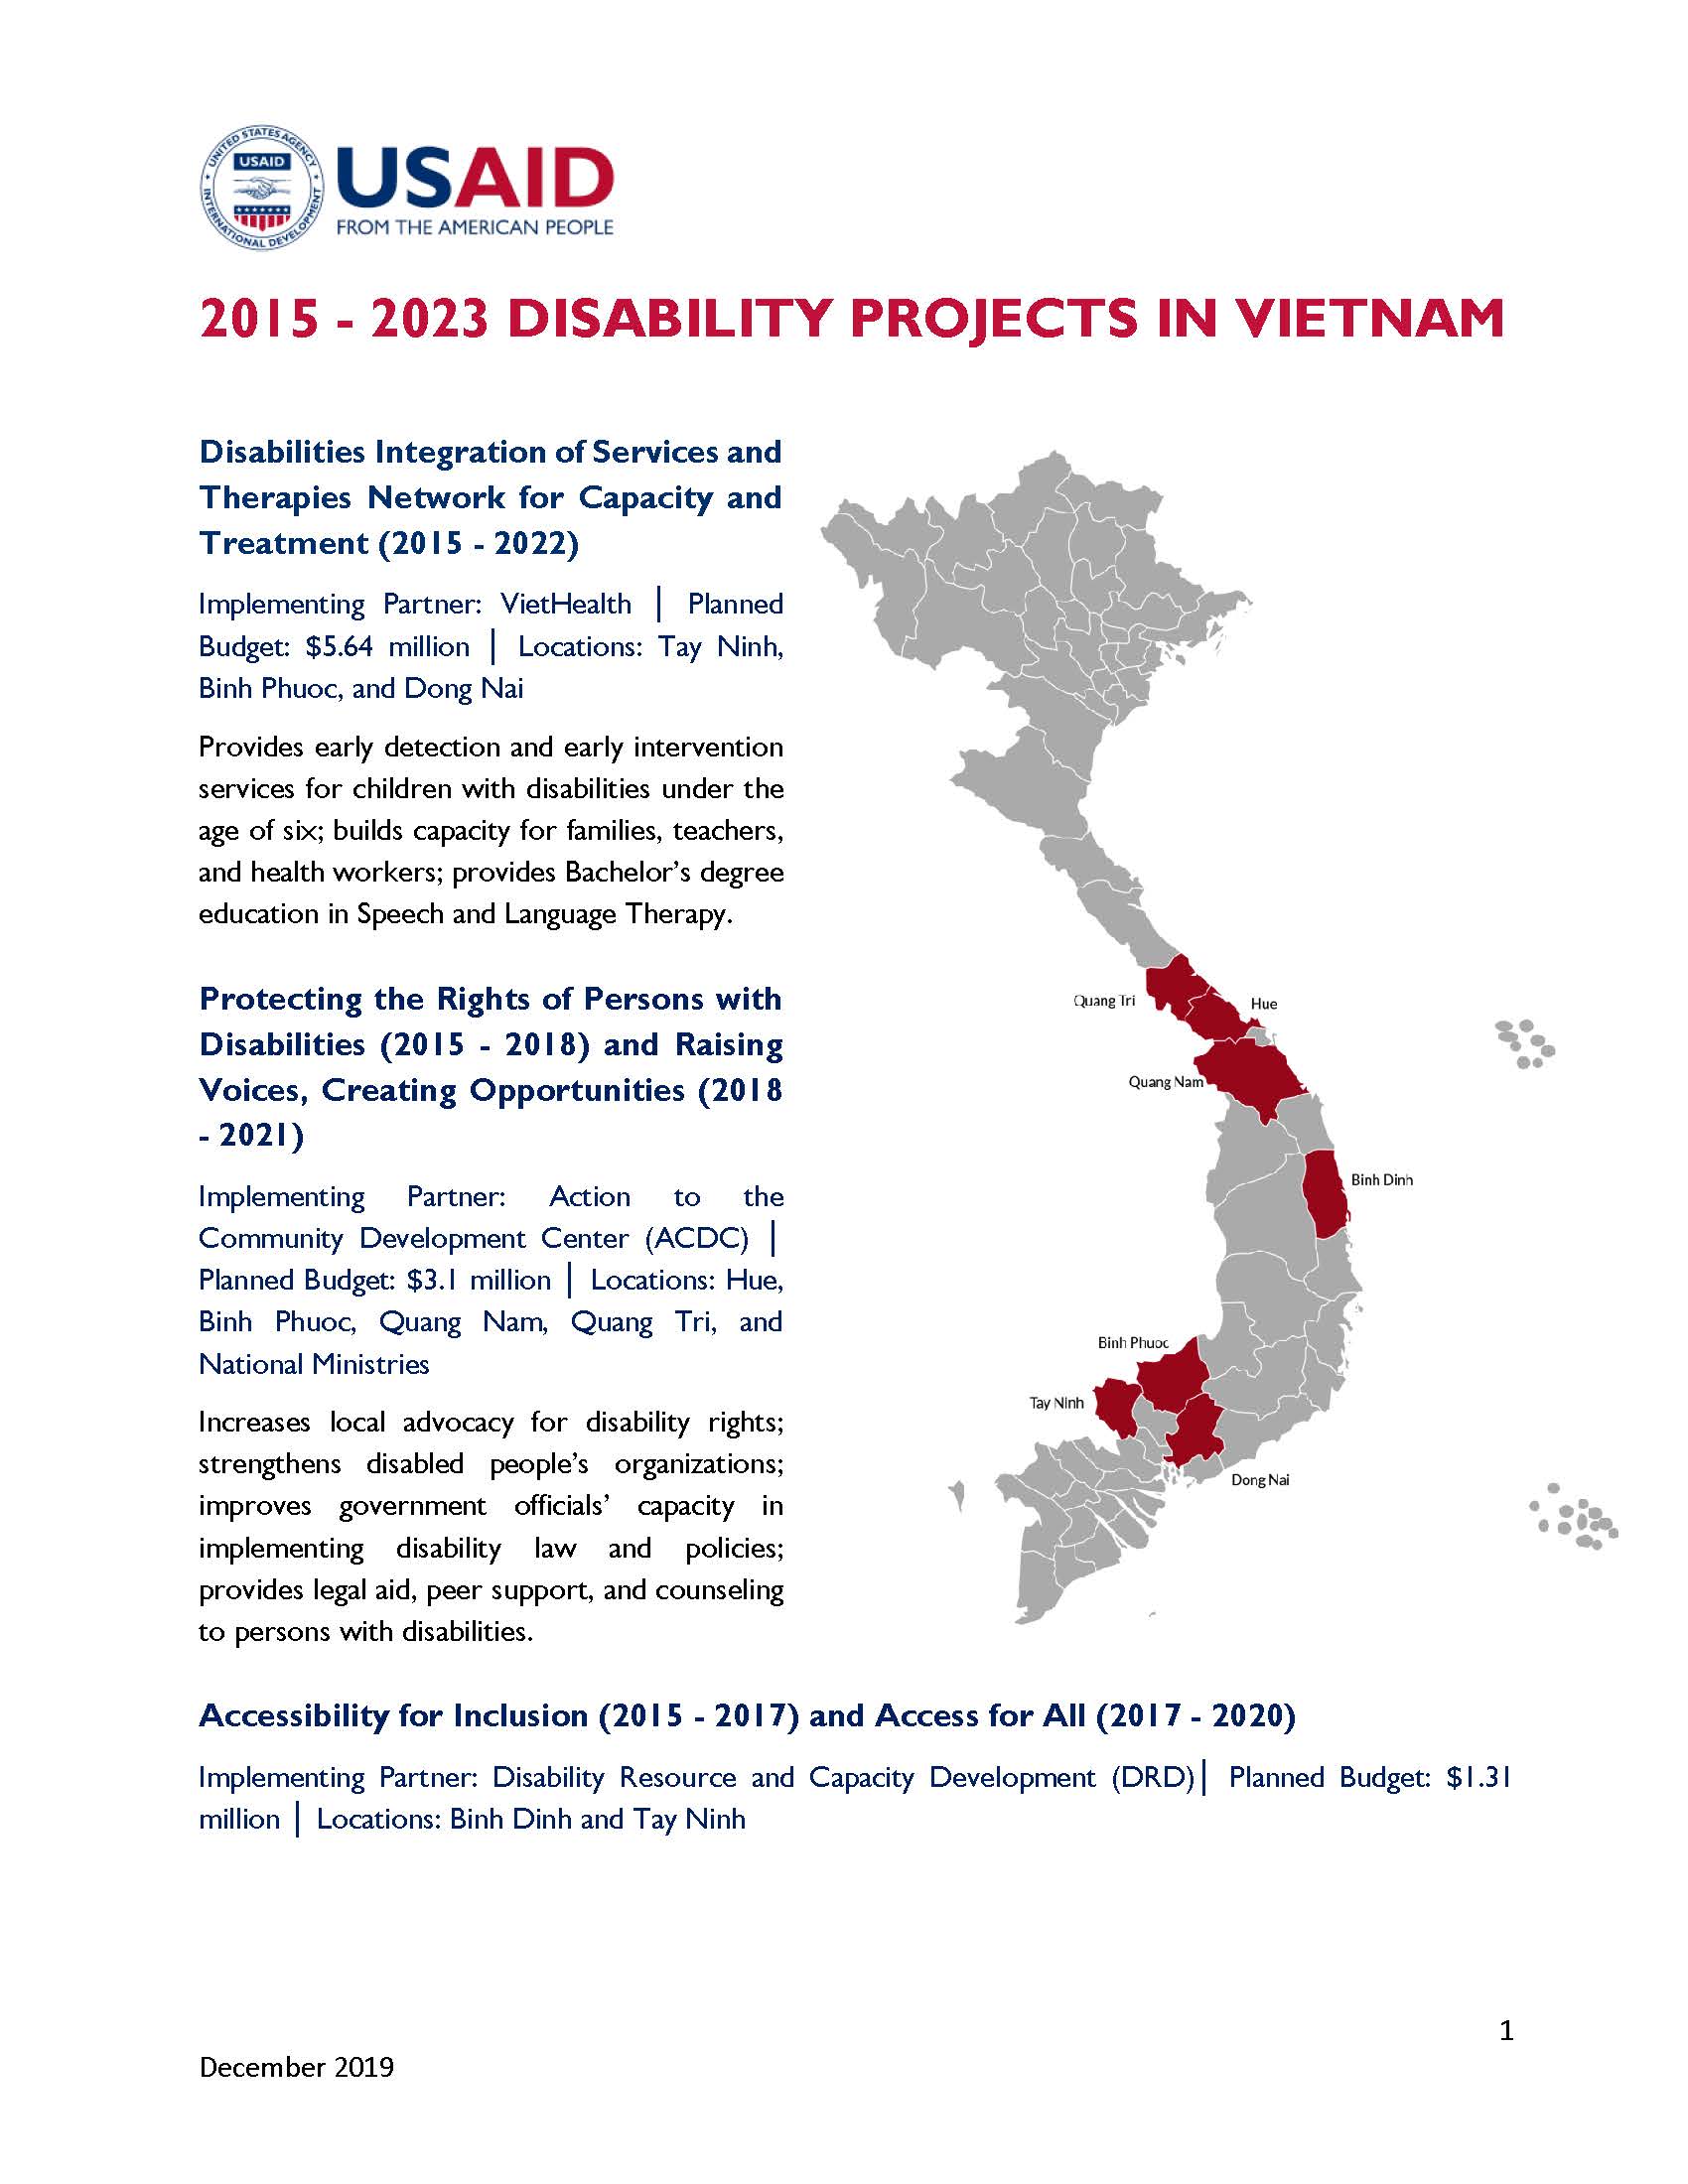 Fact sheet: 2015 - 2023 disability projects in Vietnam